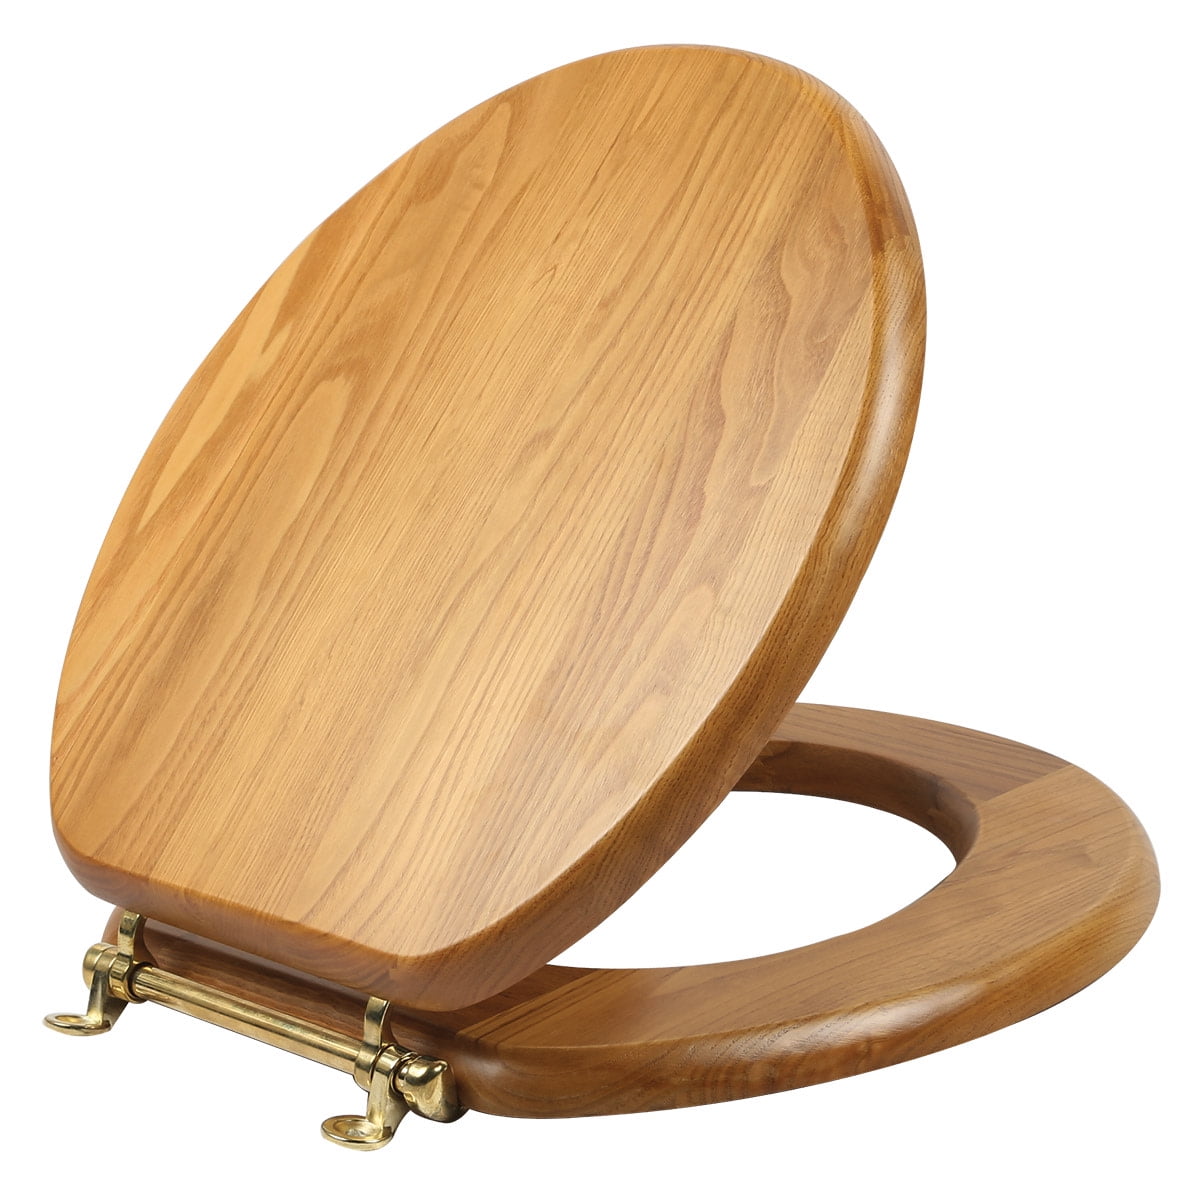 Black Heavy duty Metal Hinges Round Wooden Toilet seats with Bamboo Design 